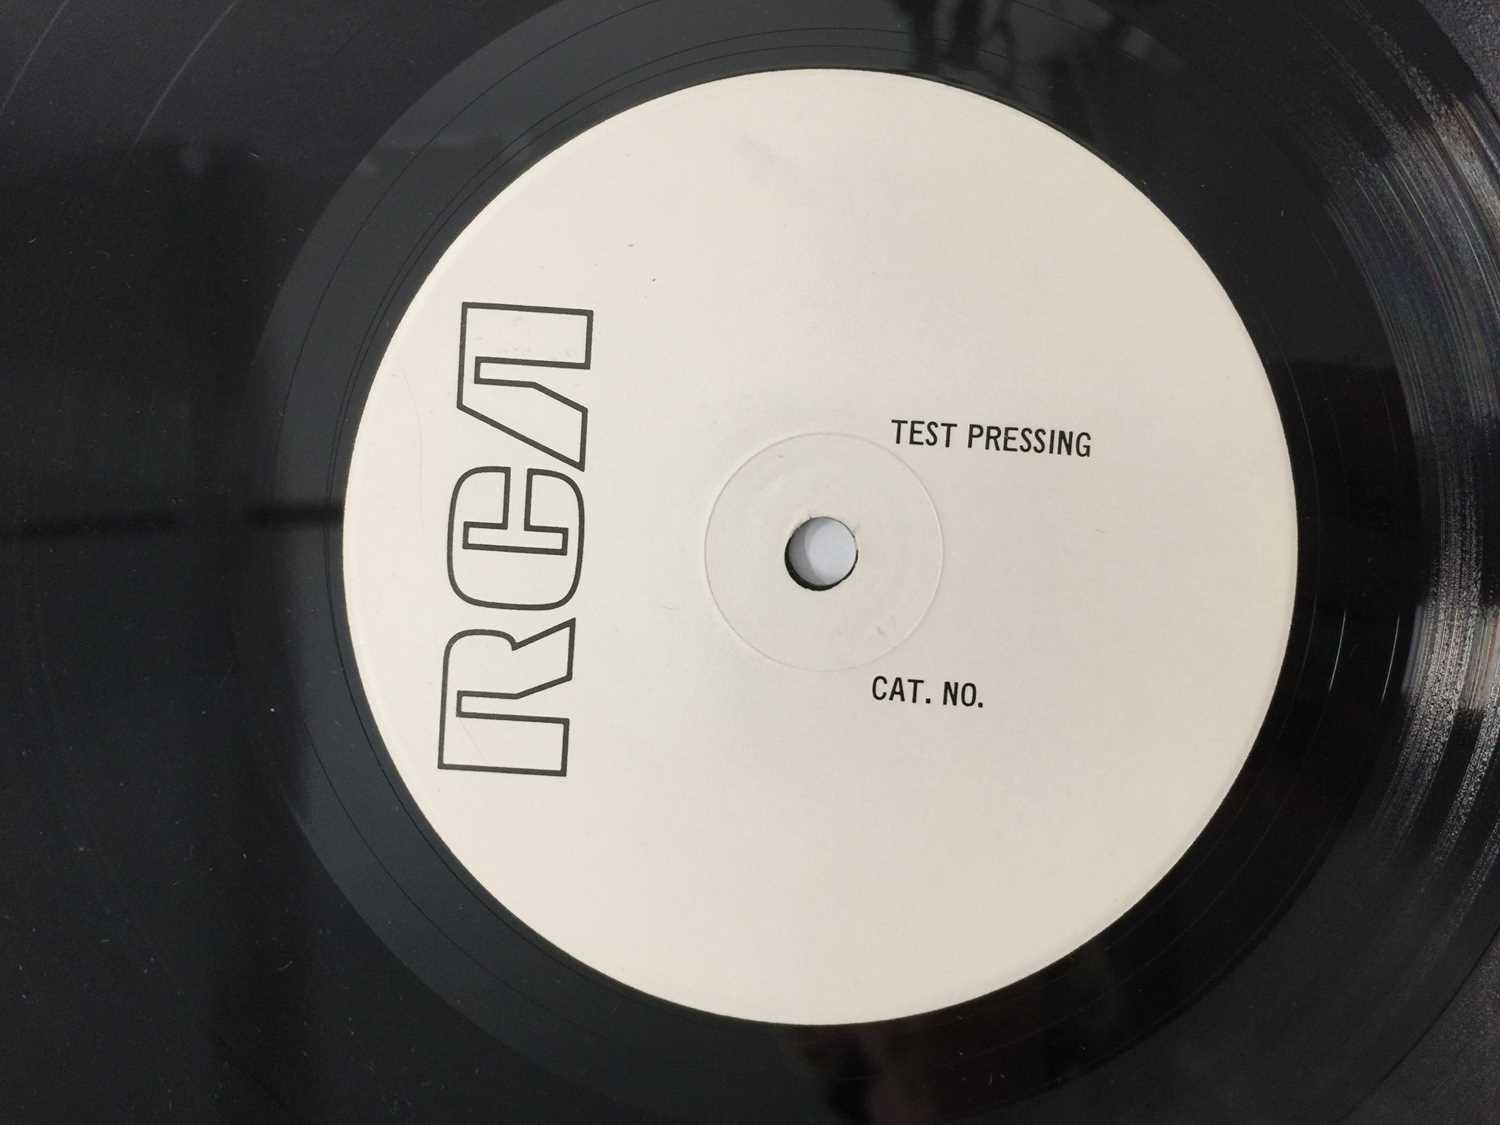 DAVID BOWIE - HUNKY DORY LP (ORIGINAL UK WHITE LABEL TEST PRESSING - RCA VICTOR SF 8244). - Image 2 of 2